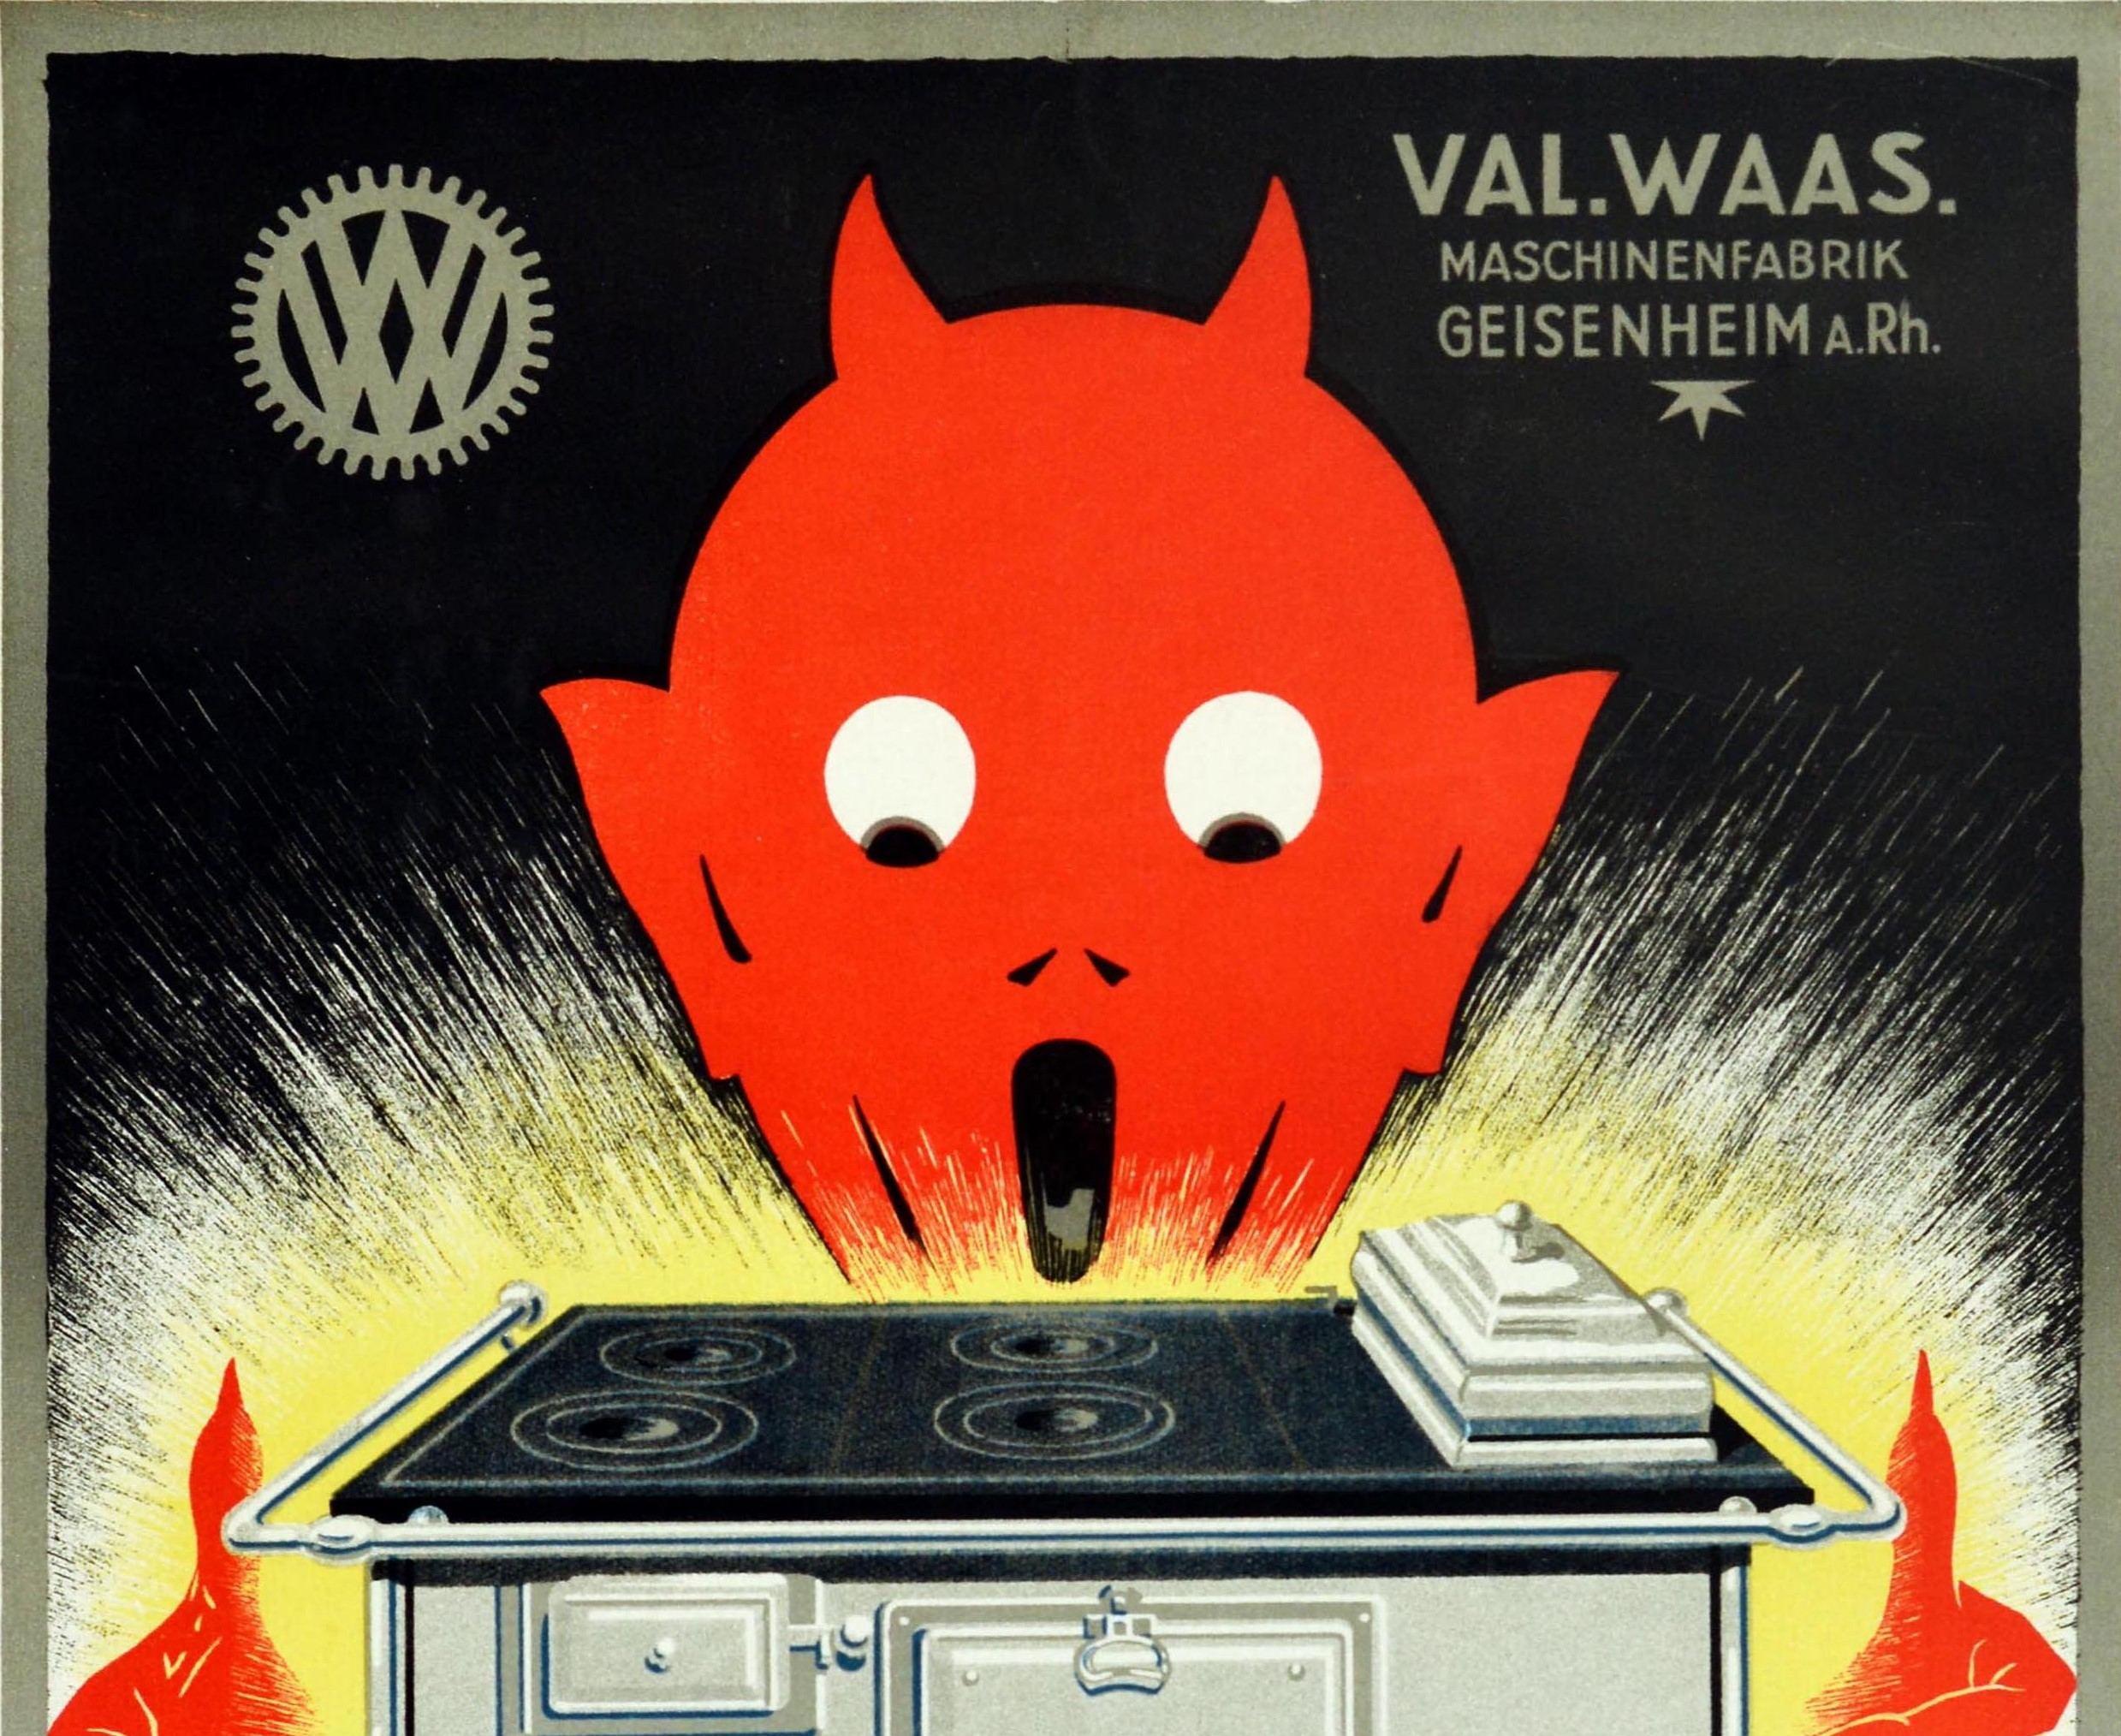 Original Vintage Poster For Waasia Household Stoves Kitchen Cooker Devil Design - Print by Unknown